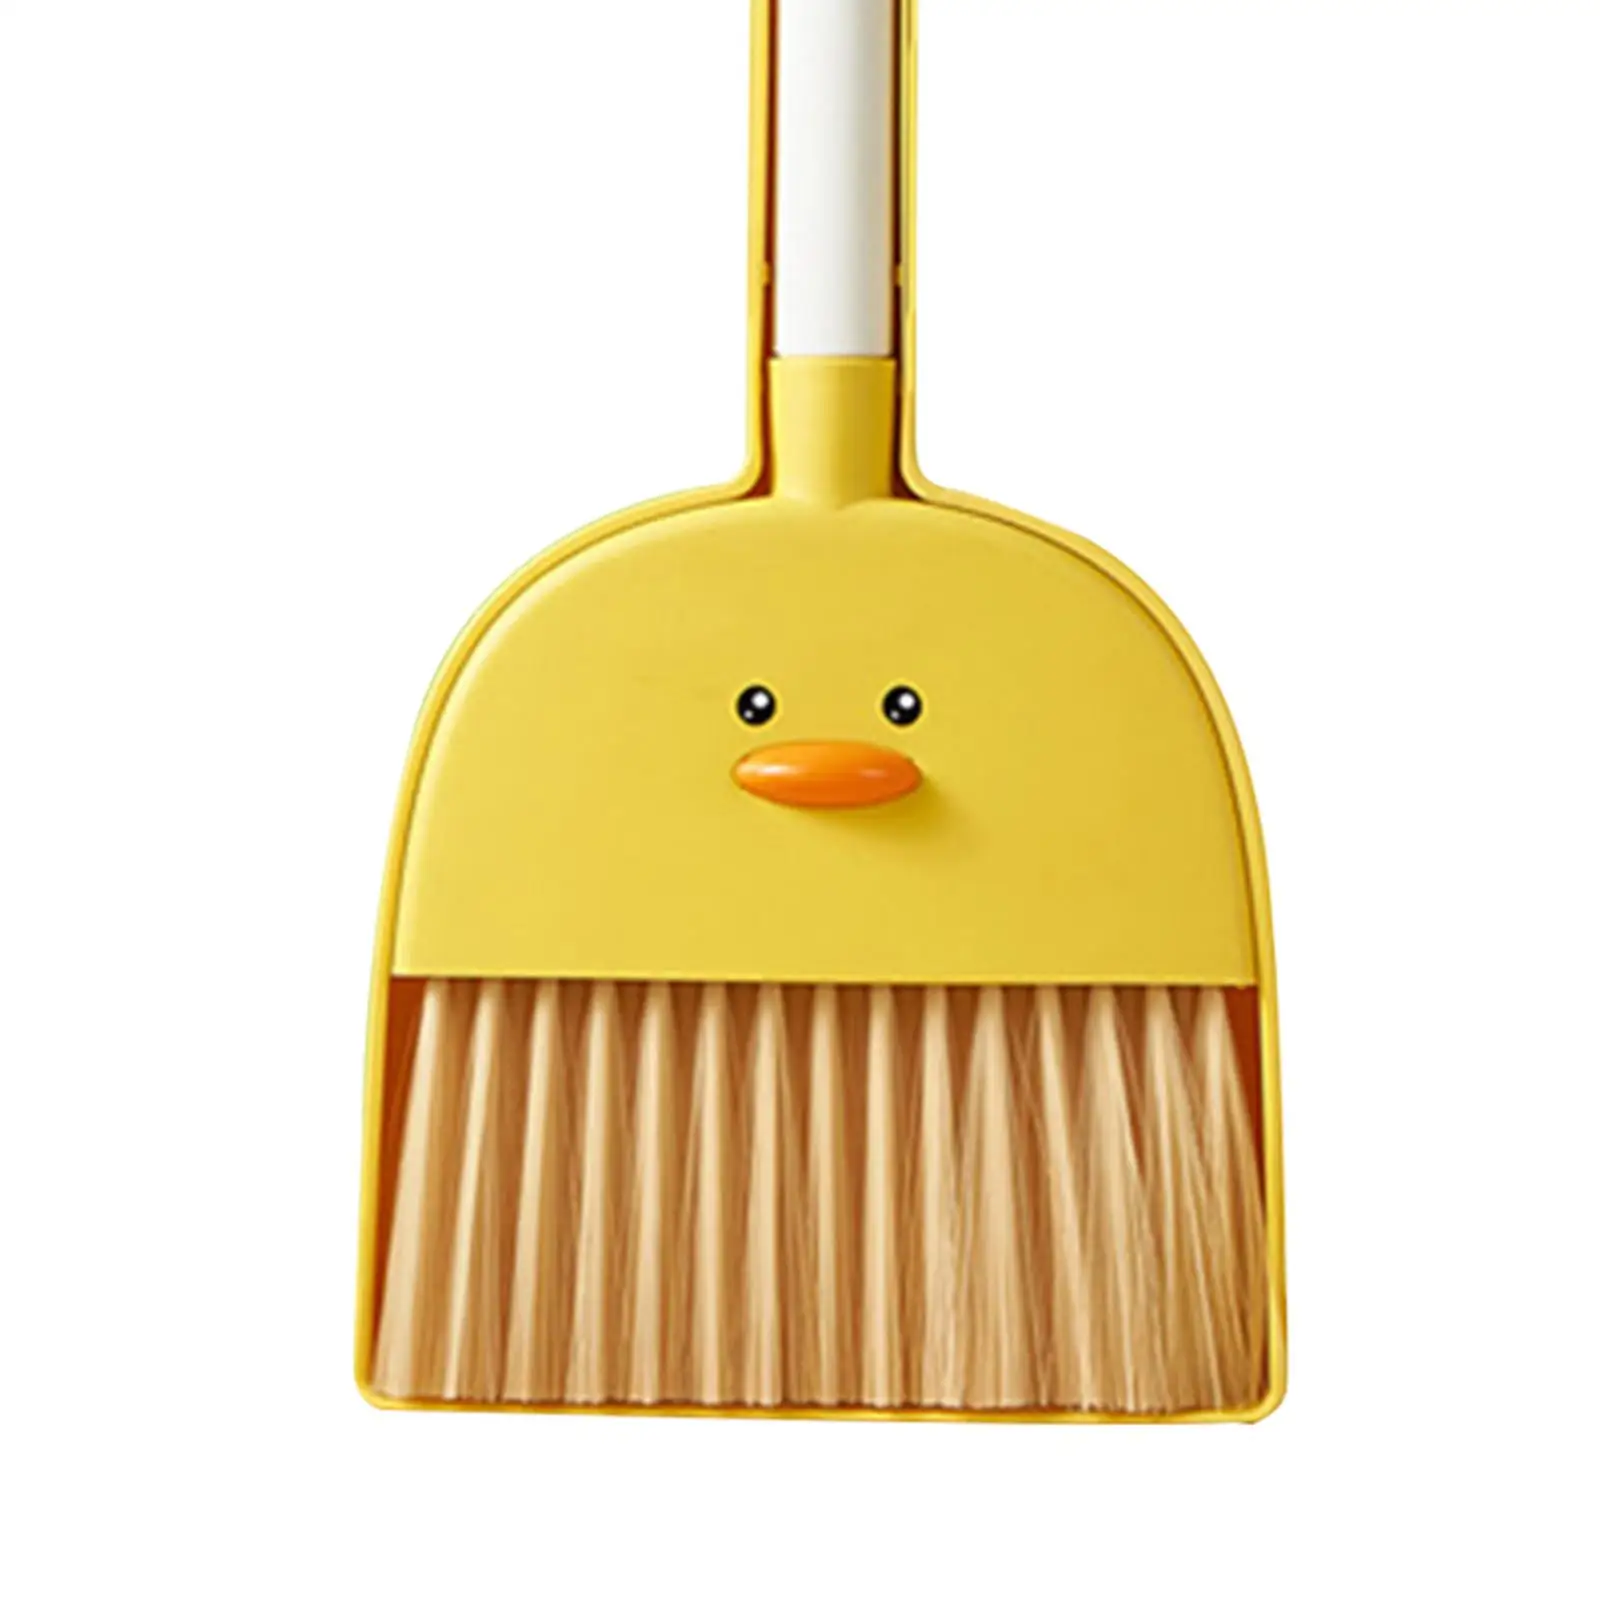 Kids Broom Set Educational Toys Cleaning Toys Gift Cleaning Sweeping Play Set Household Mini Kid Broom and Dustpan Set for Girls